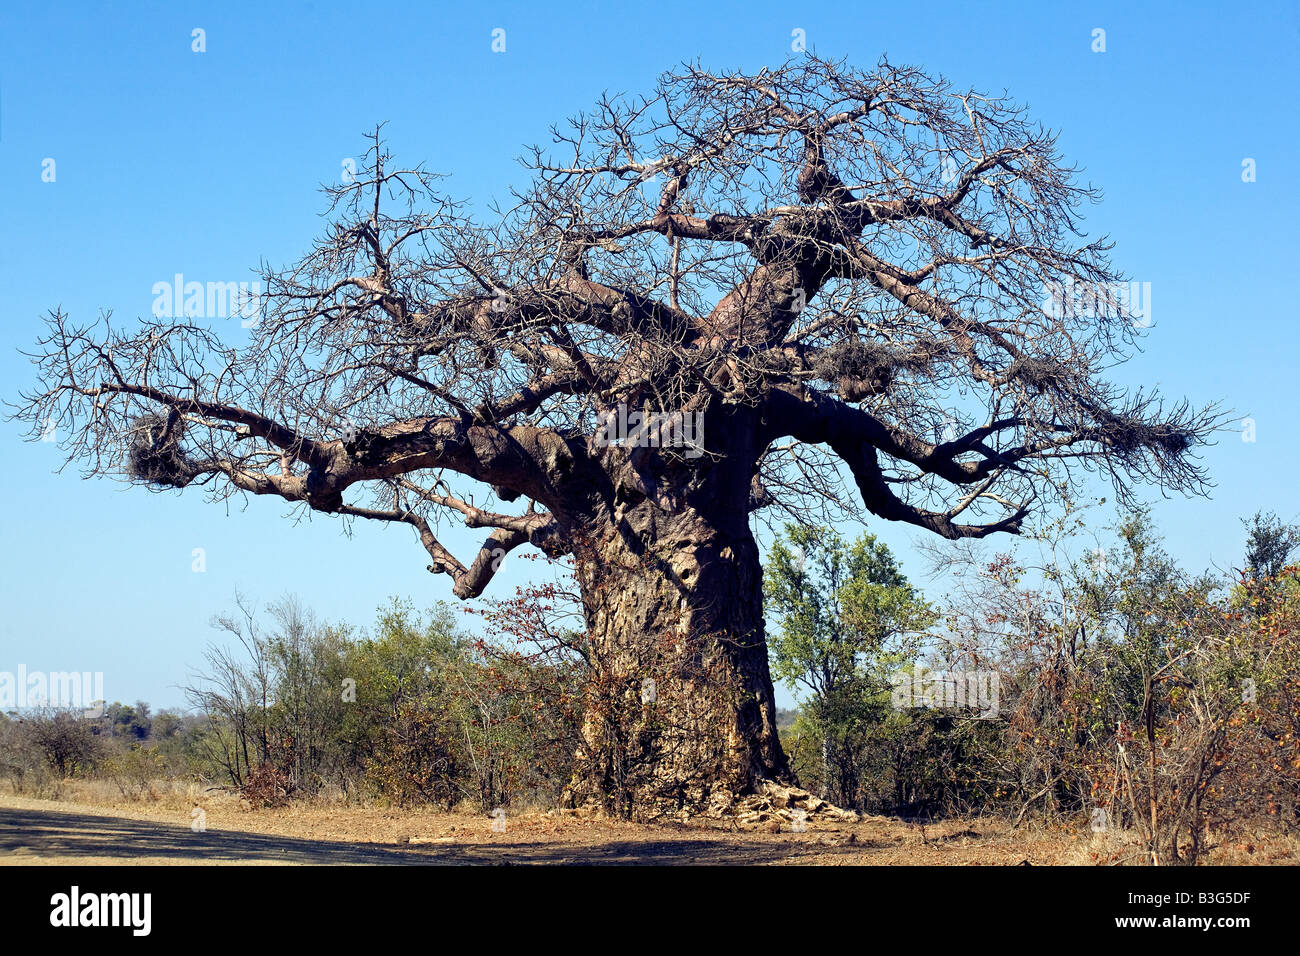 Deciduous giant baobab tree (Adansonia digitata), thousands of years old, in Kruger National Park is leafless in winter Stock Photo